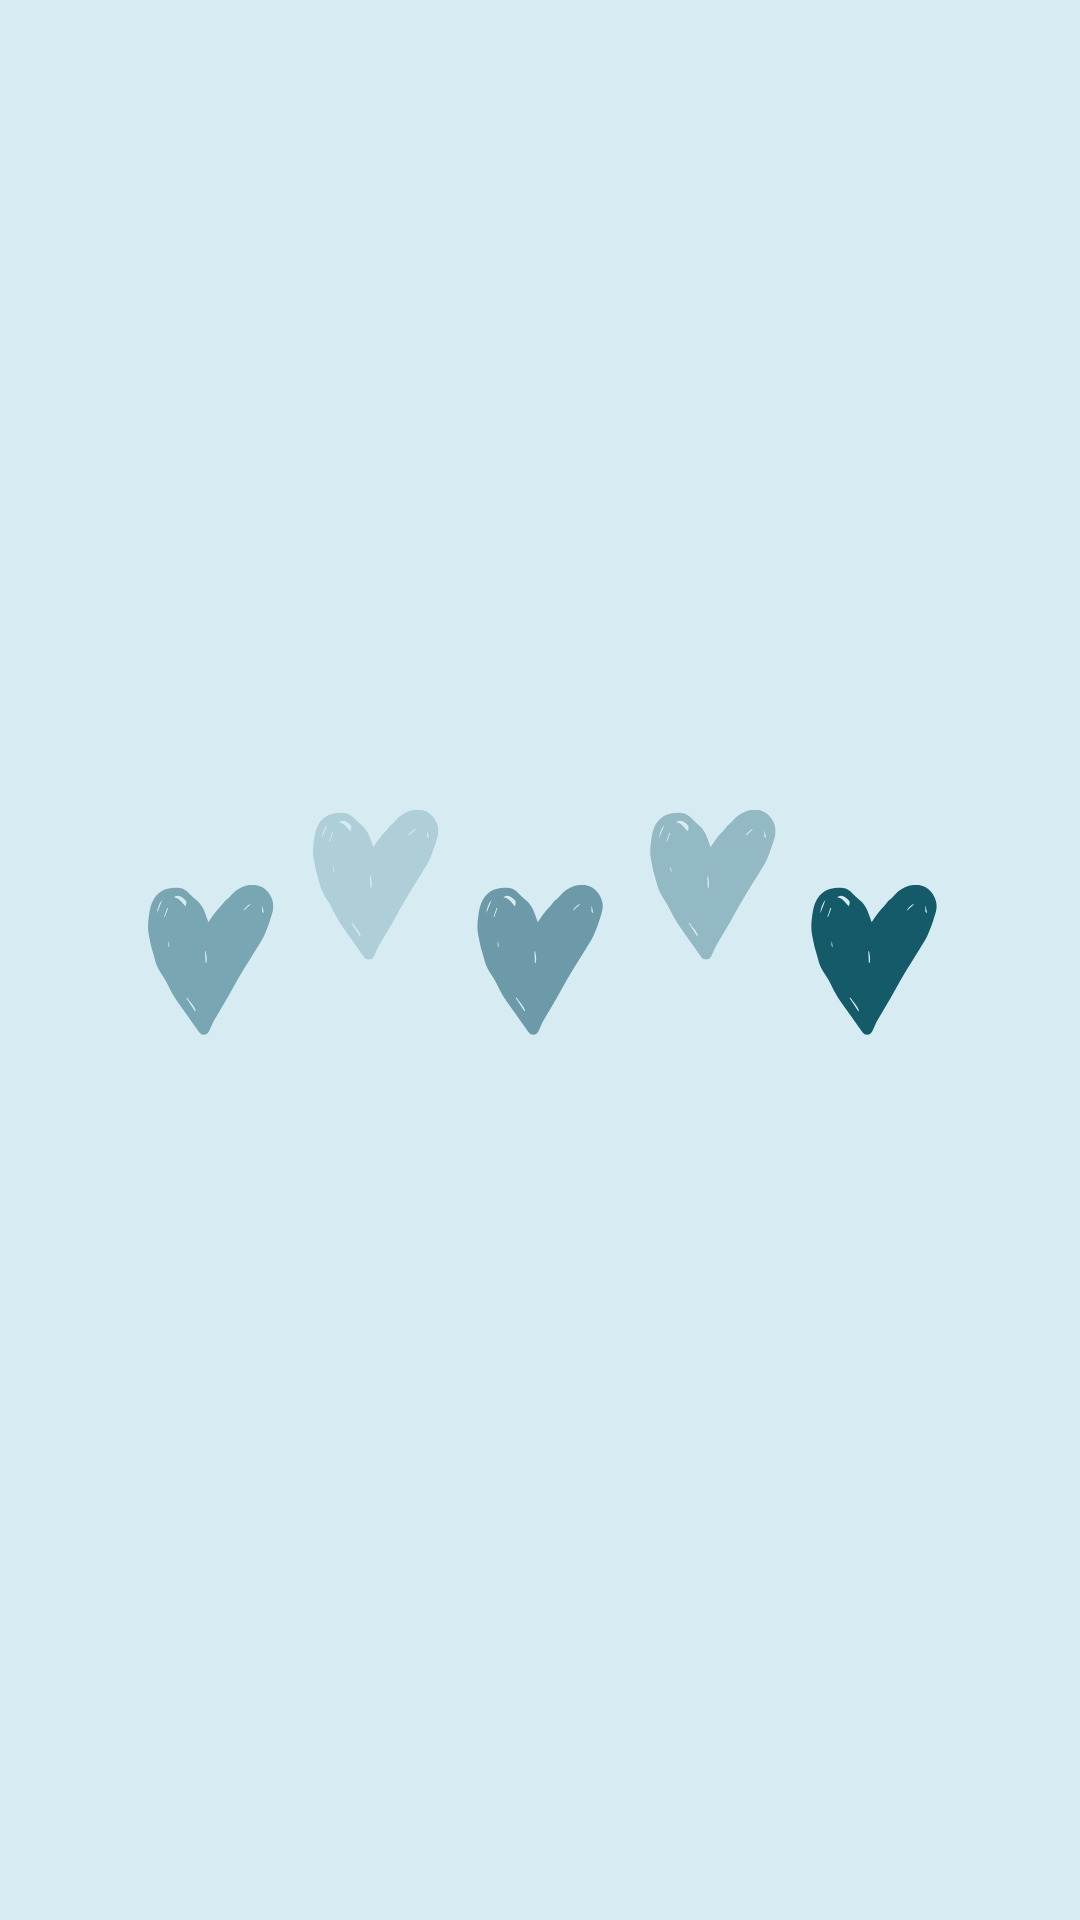 A blue heart with five hearts on it - Pastel blue, cute